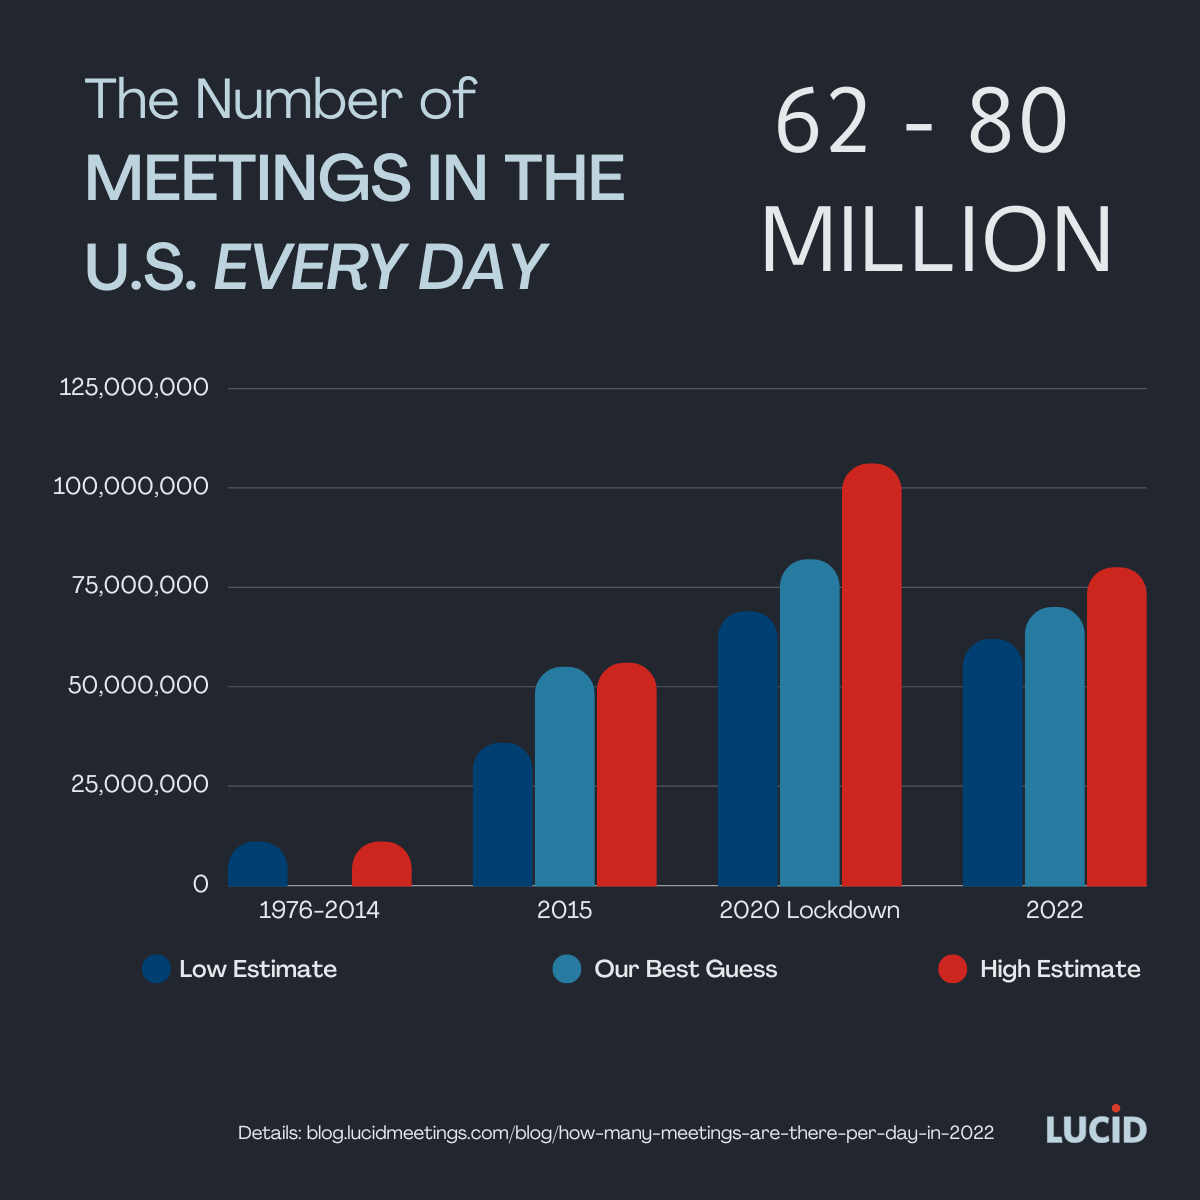 in 2022 we estimate there are between 62 and 80 million meetings per day in the US